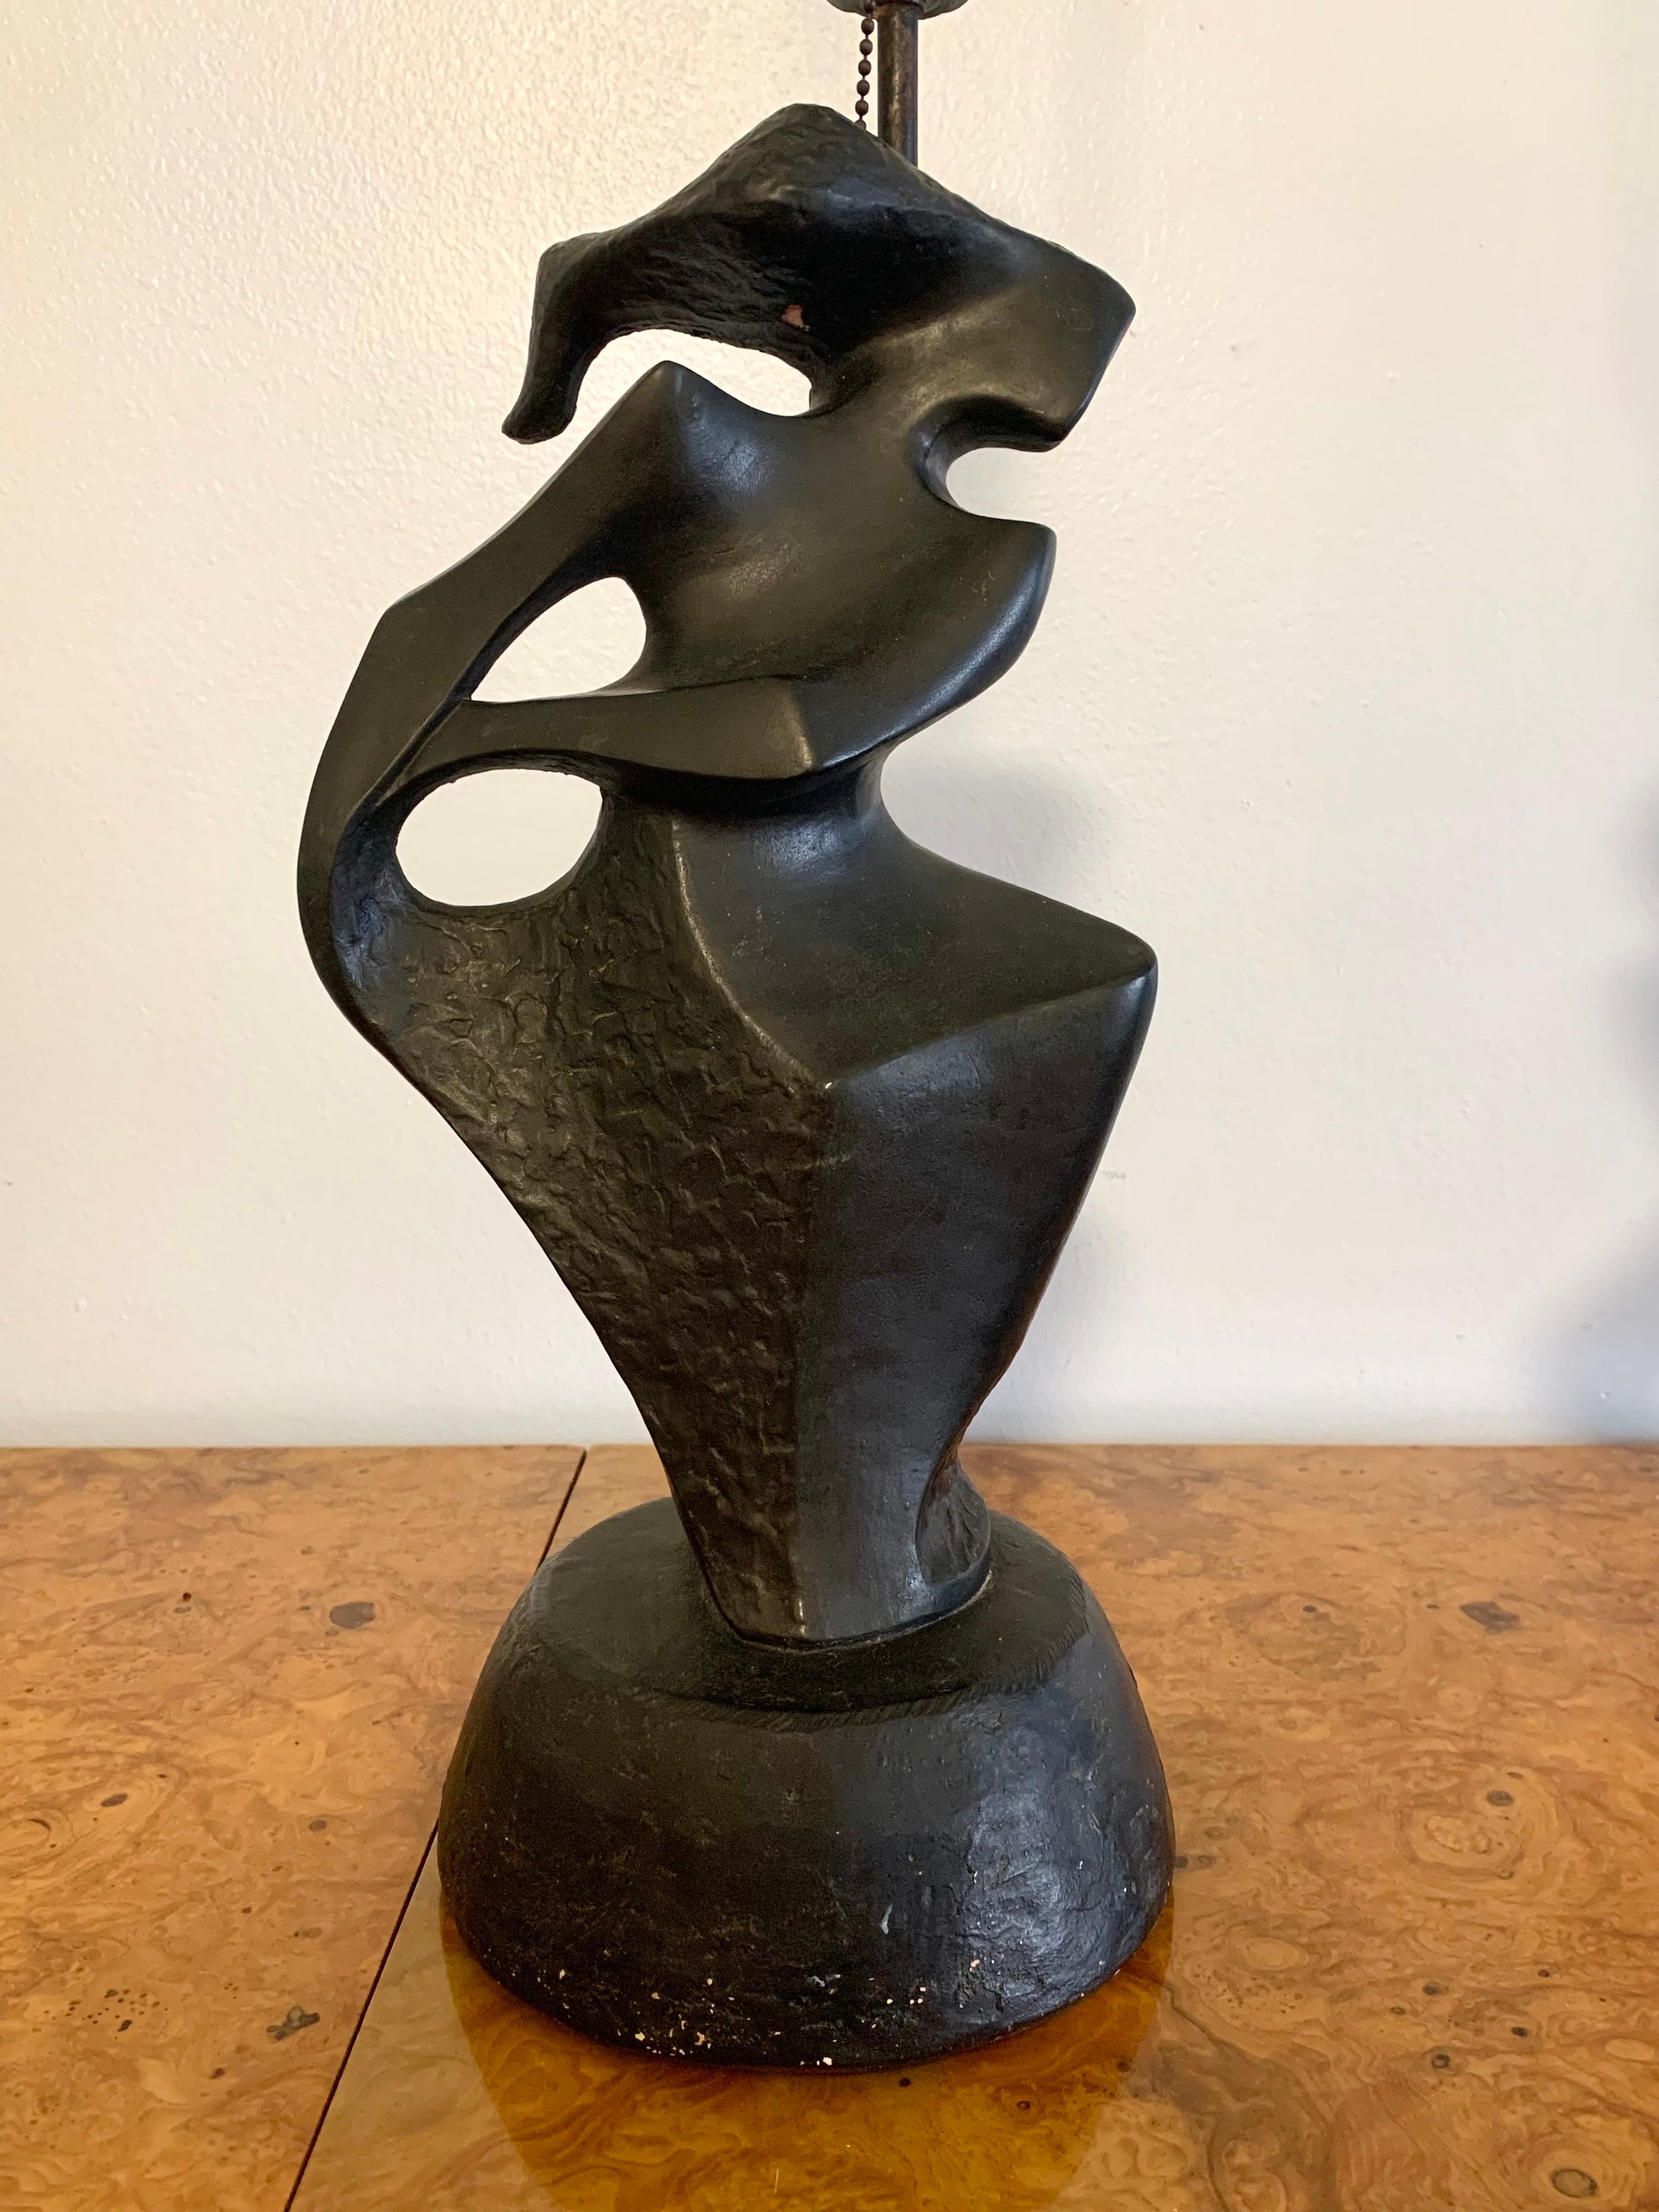 Pair of cubist modernism lamps by Rima of NY. Designed by Marianna von Allesch. Shapes are dynamic and flowing depicting a male and female dancing. Lamps have great angles and textures that really catch the eye. Would fit well in Mid Century Modern,